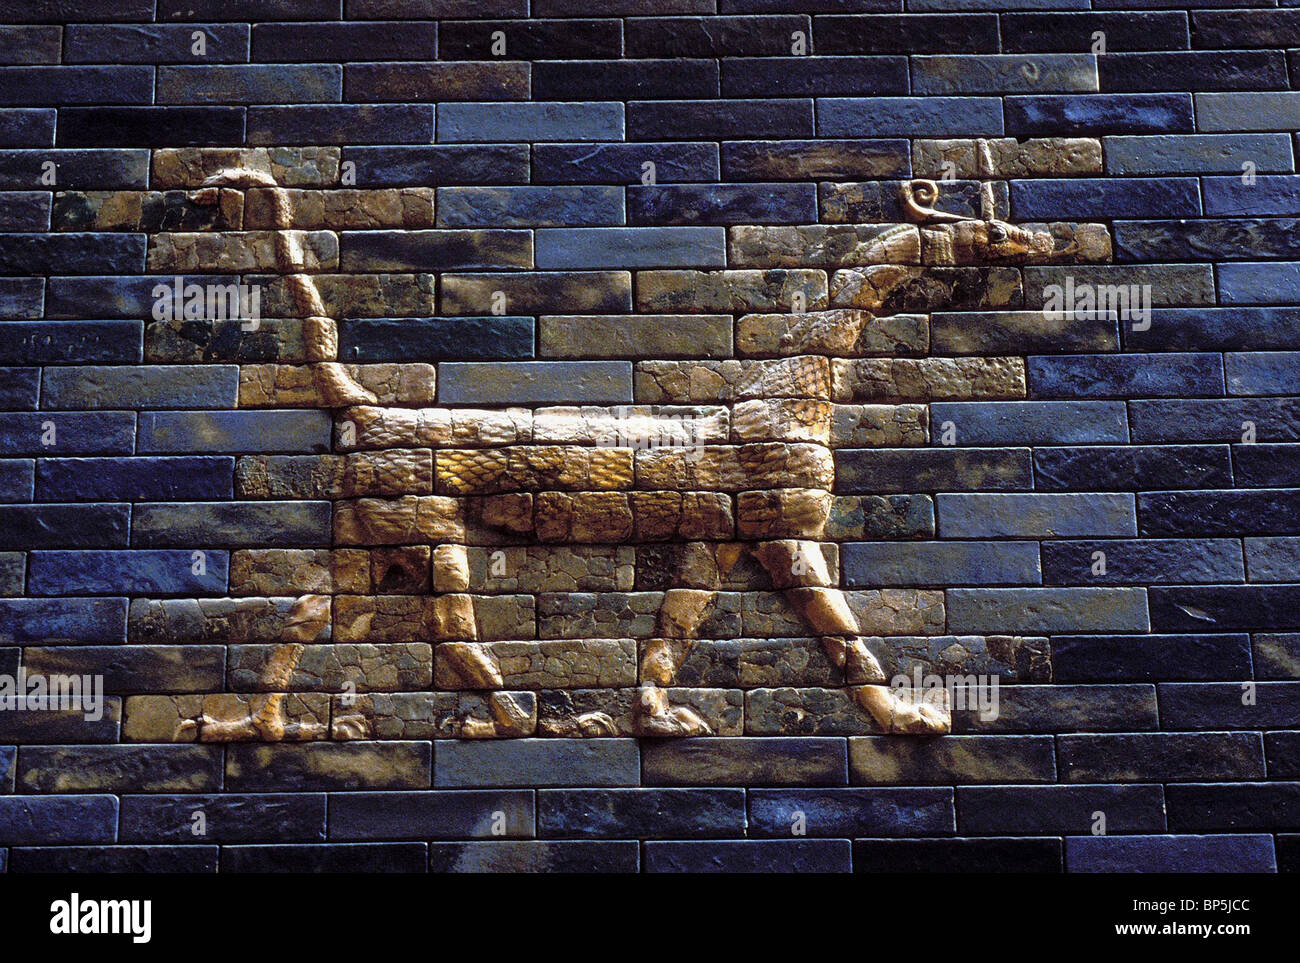 3750. DETAIL DEPICTING A SERPENT-DRAGON FROM THE ISHTAR GATE OG BABYLON BUILT BY KING NEBUHADNEZAR II. IN THE 6TH. C. BC Stock Photo